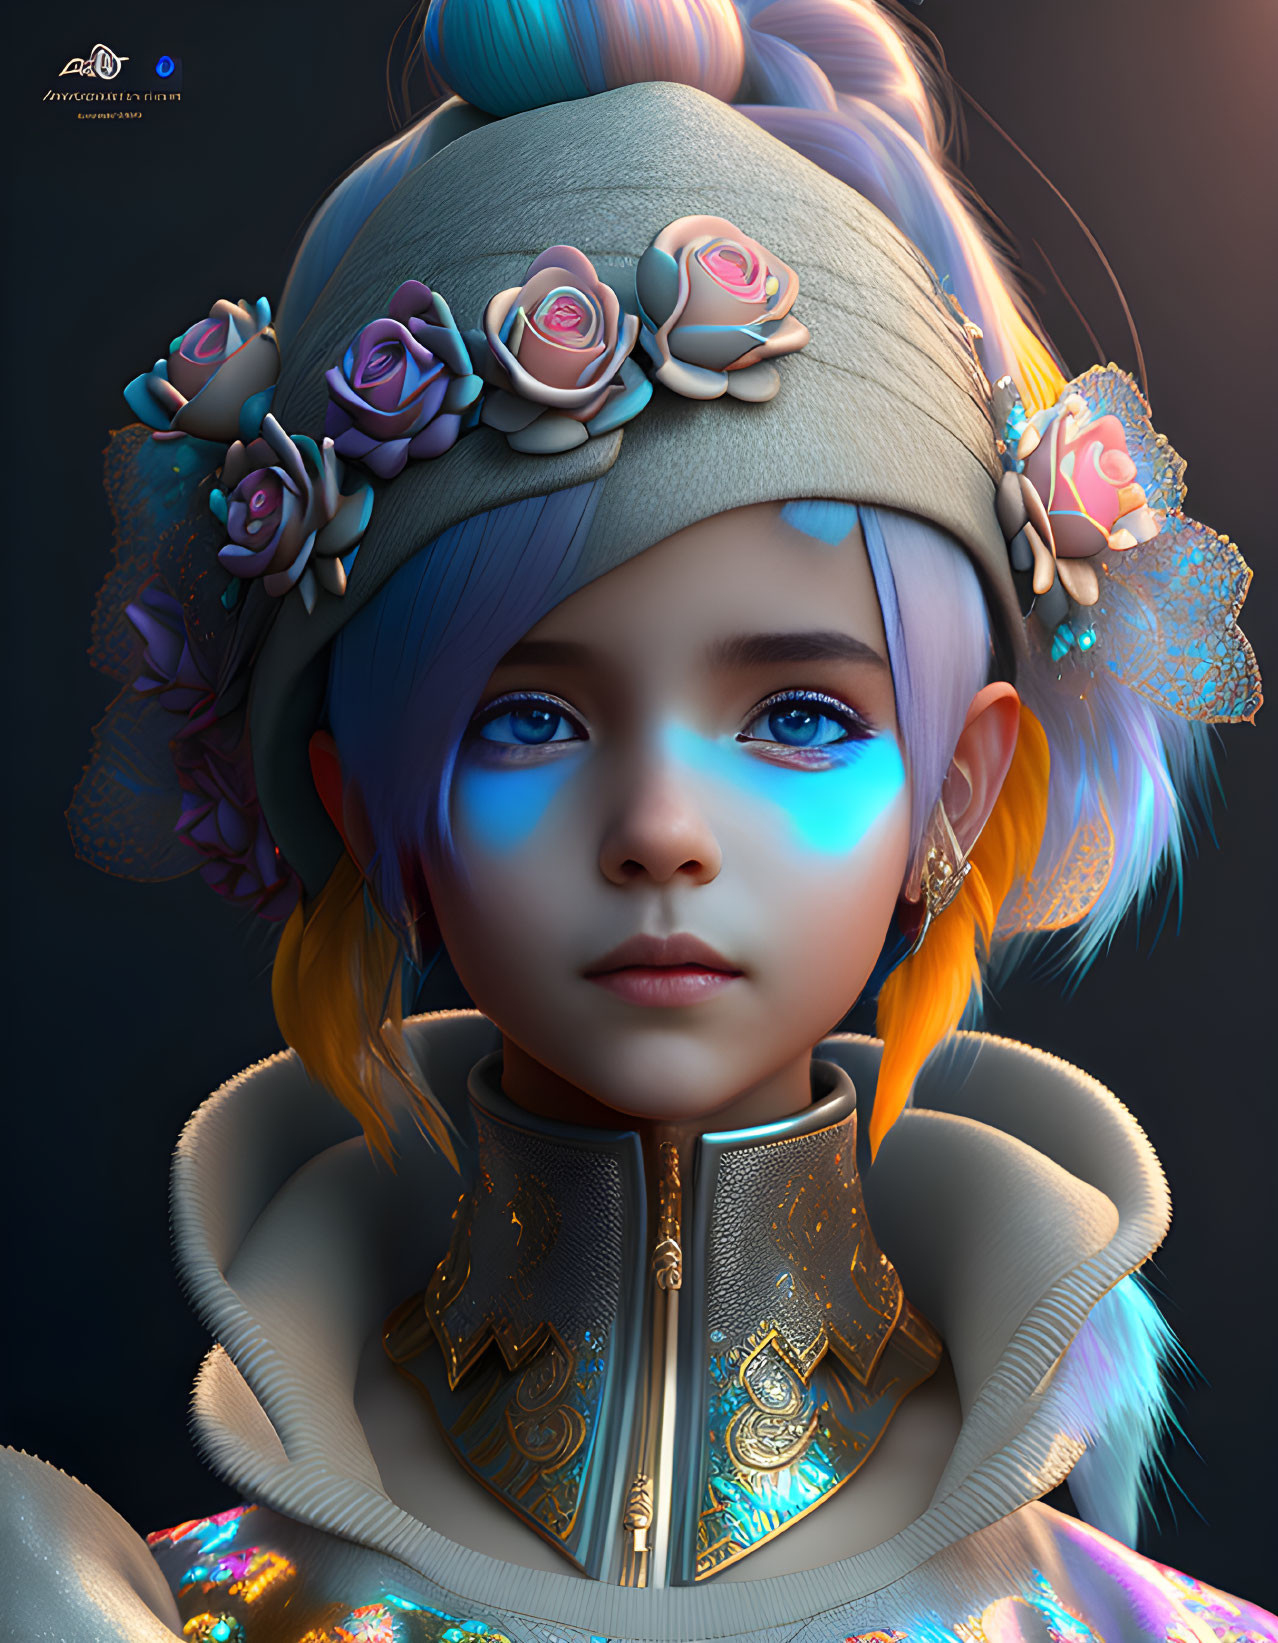 Digital portrait of girl with blue eyes, purple hair, floral headband, and golden armor